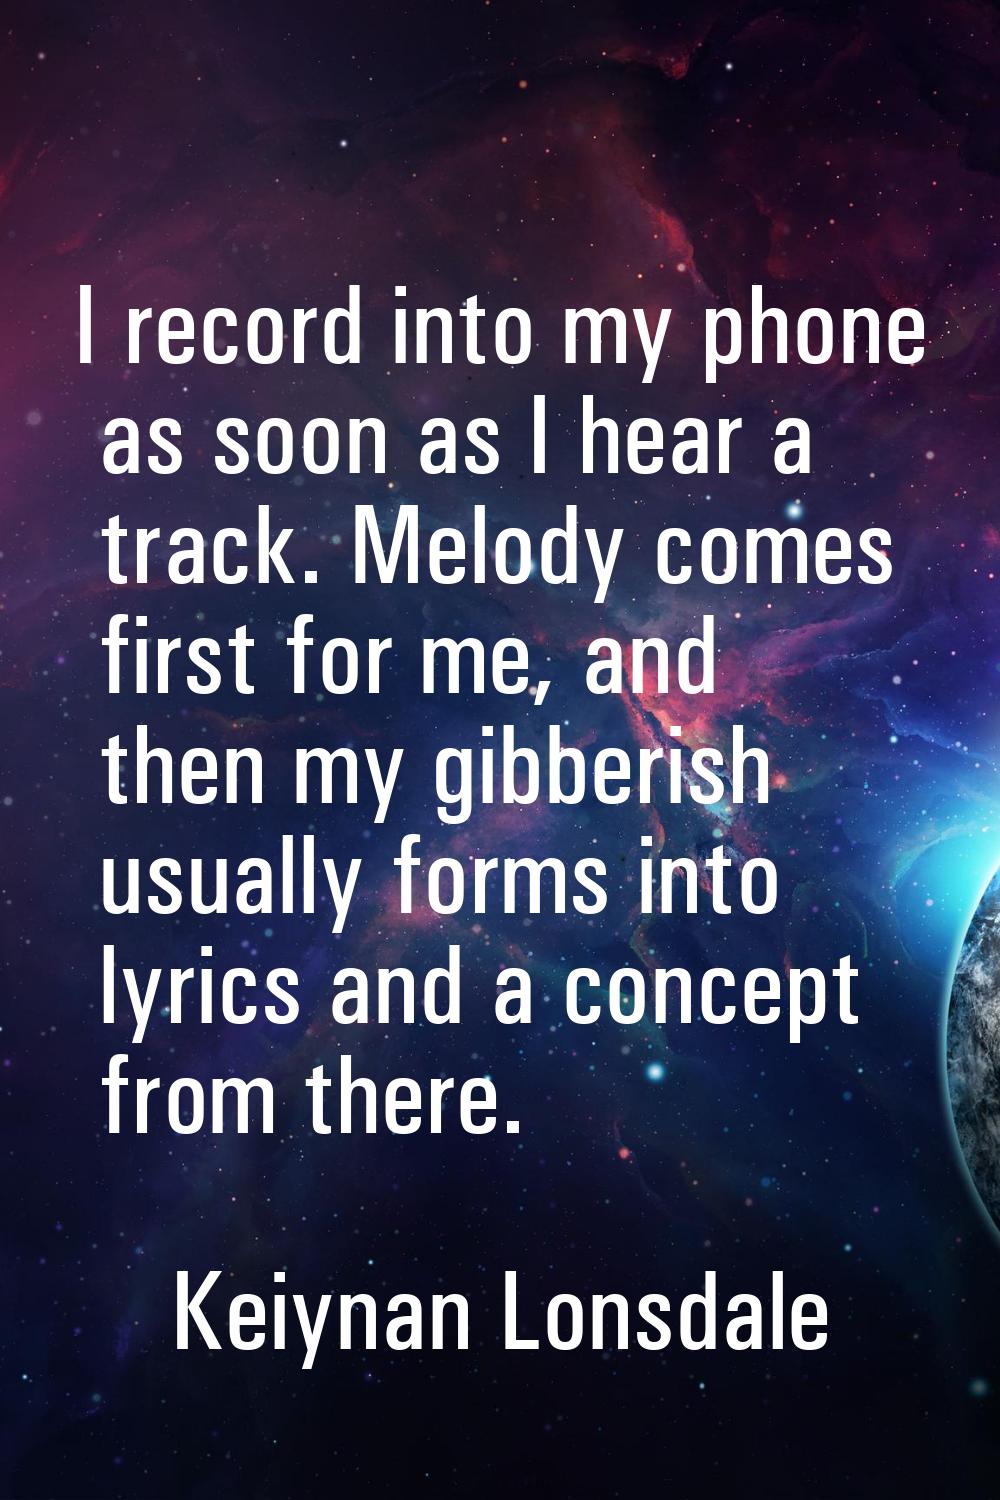 I record into my phone as soon as I hear a track. Melody comes first for me, and then my gibberish 